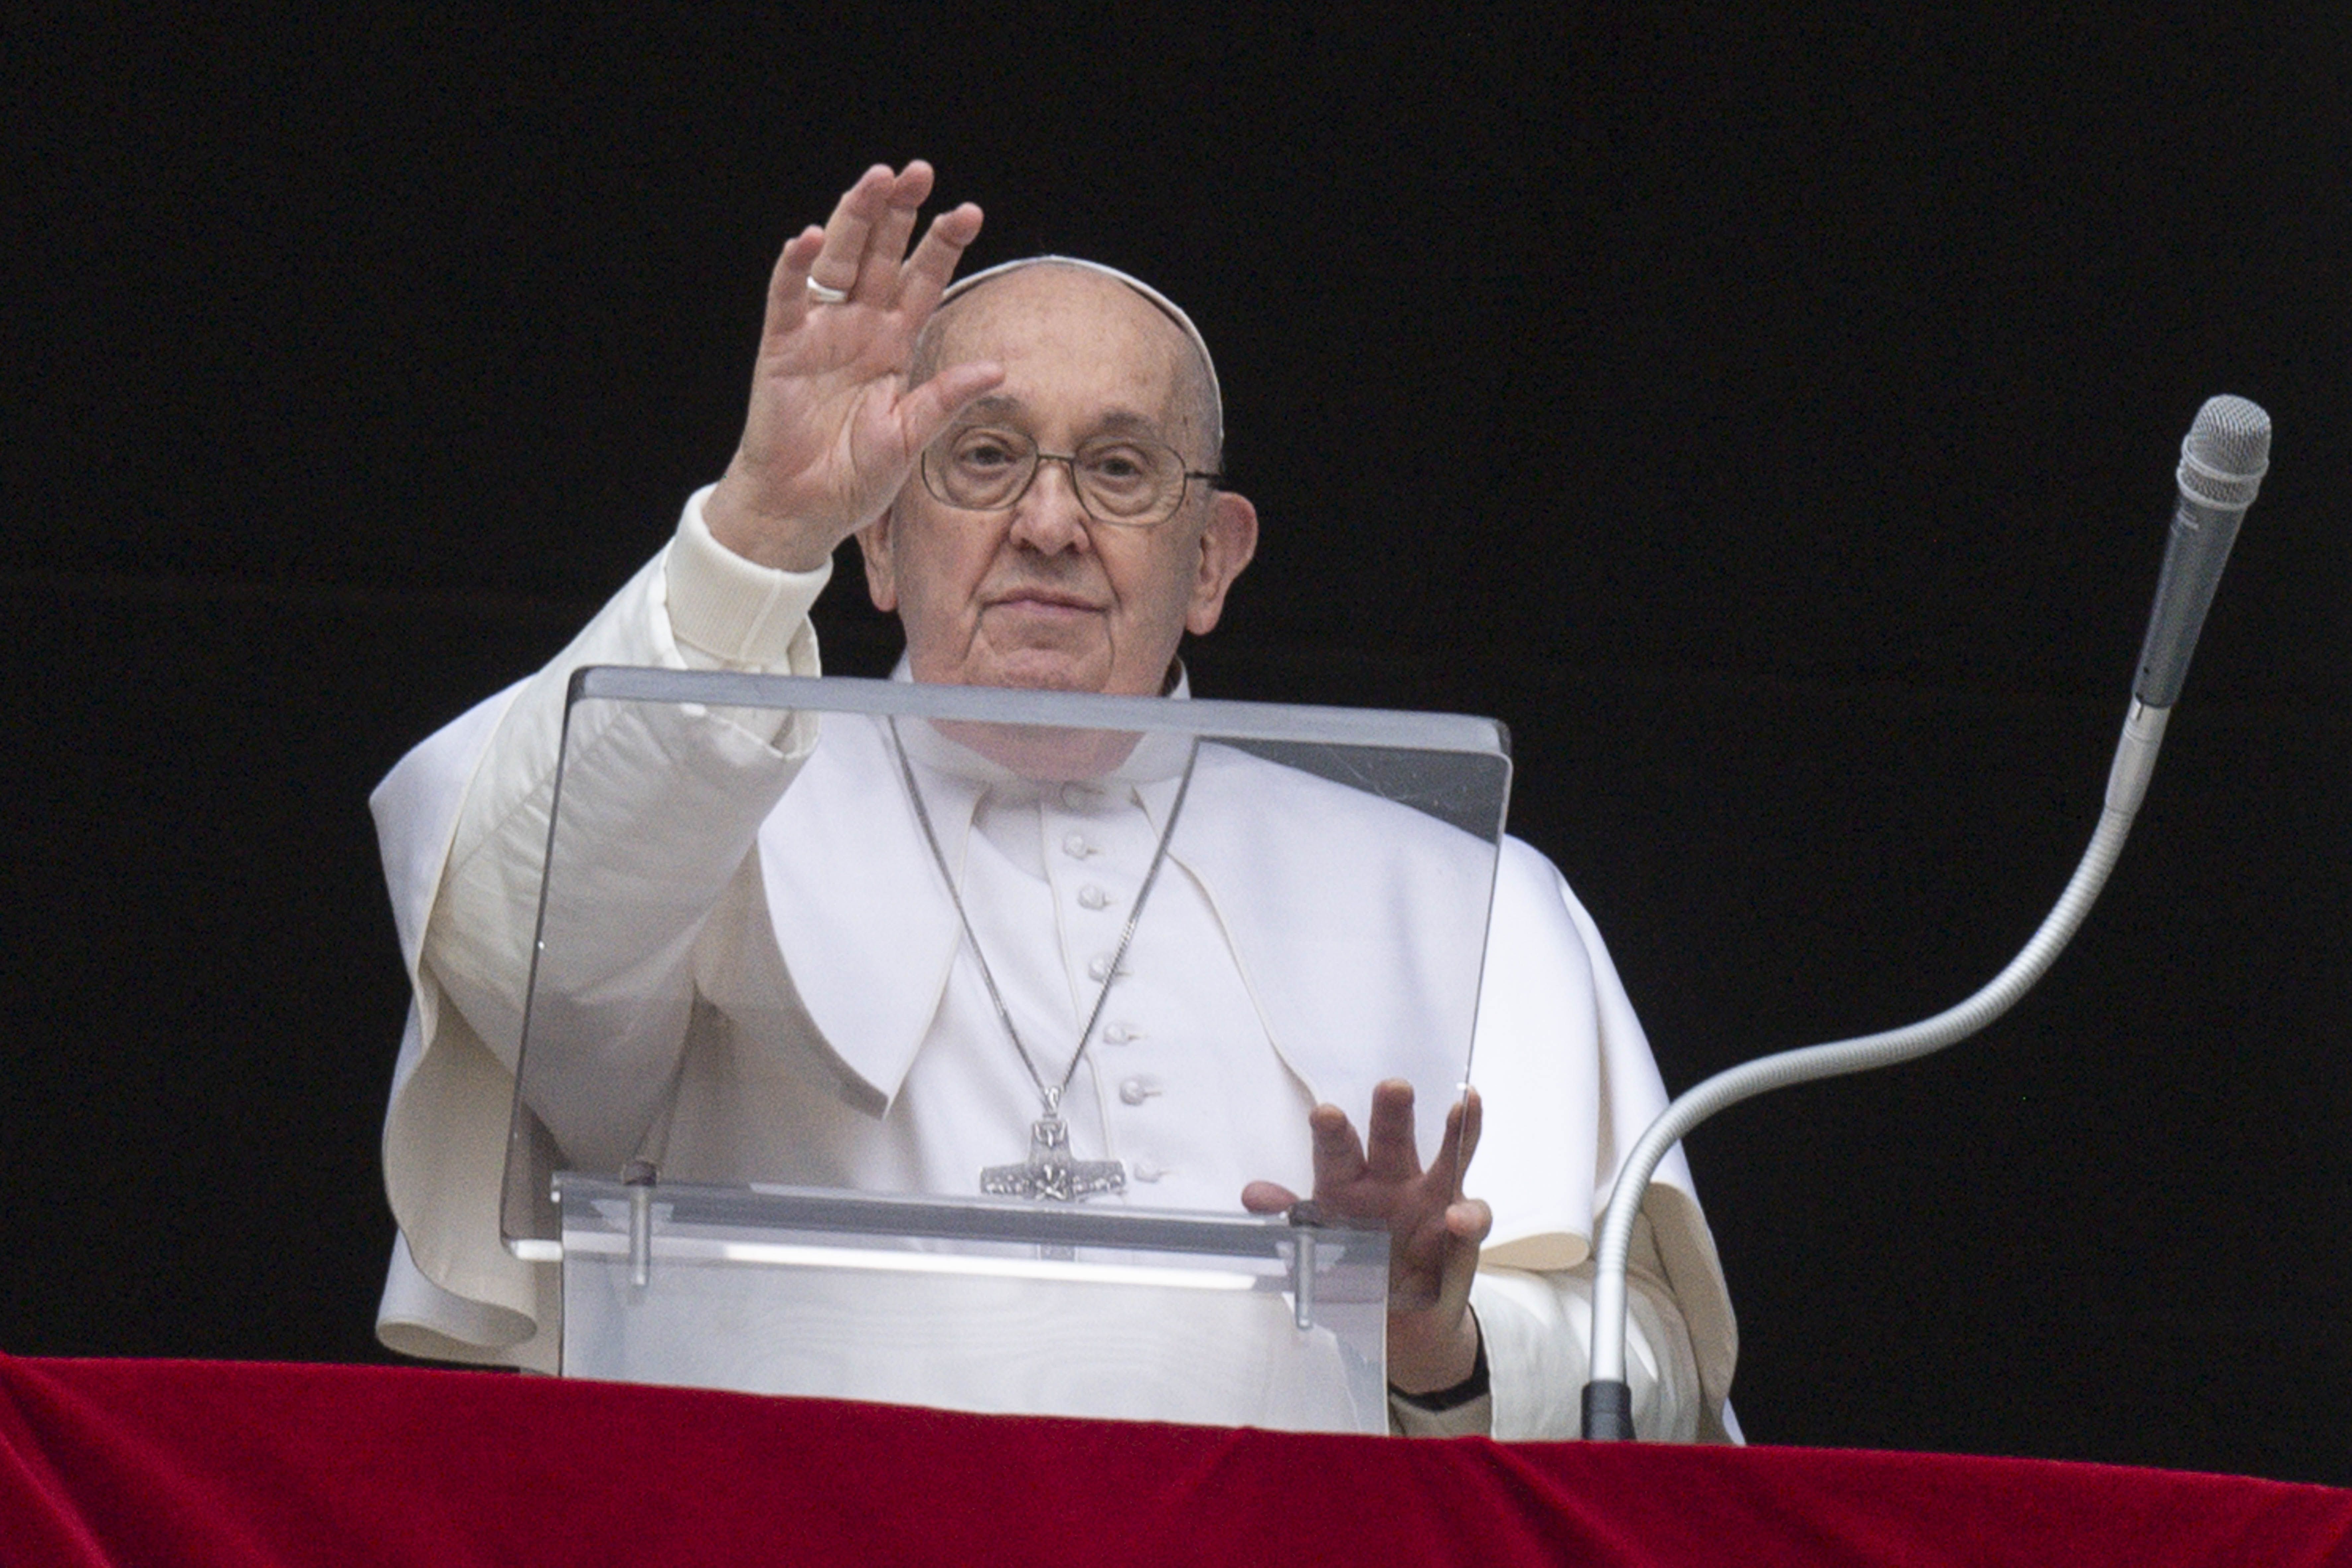 Pope Francis: We have a duty to help women accept the gift of life